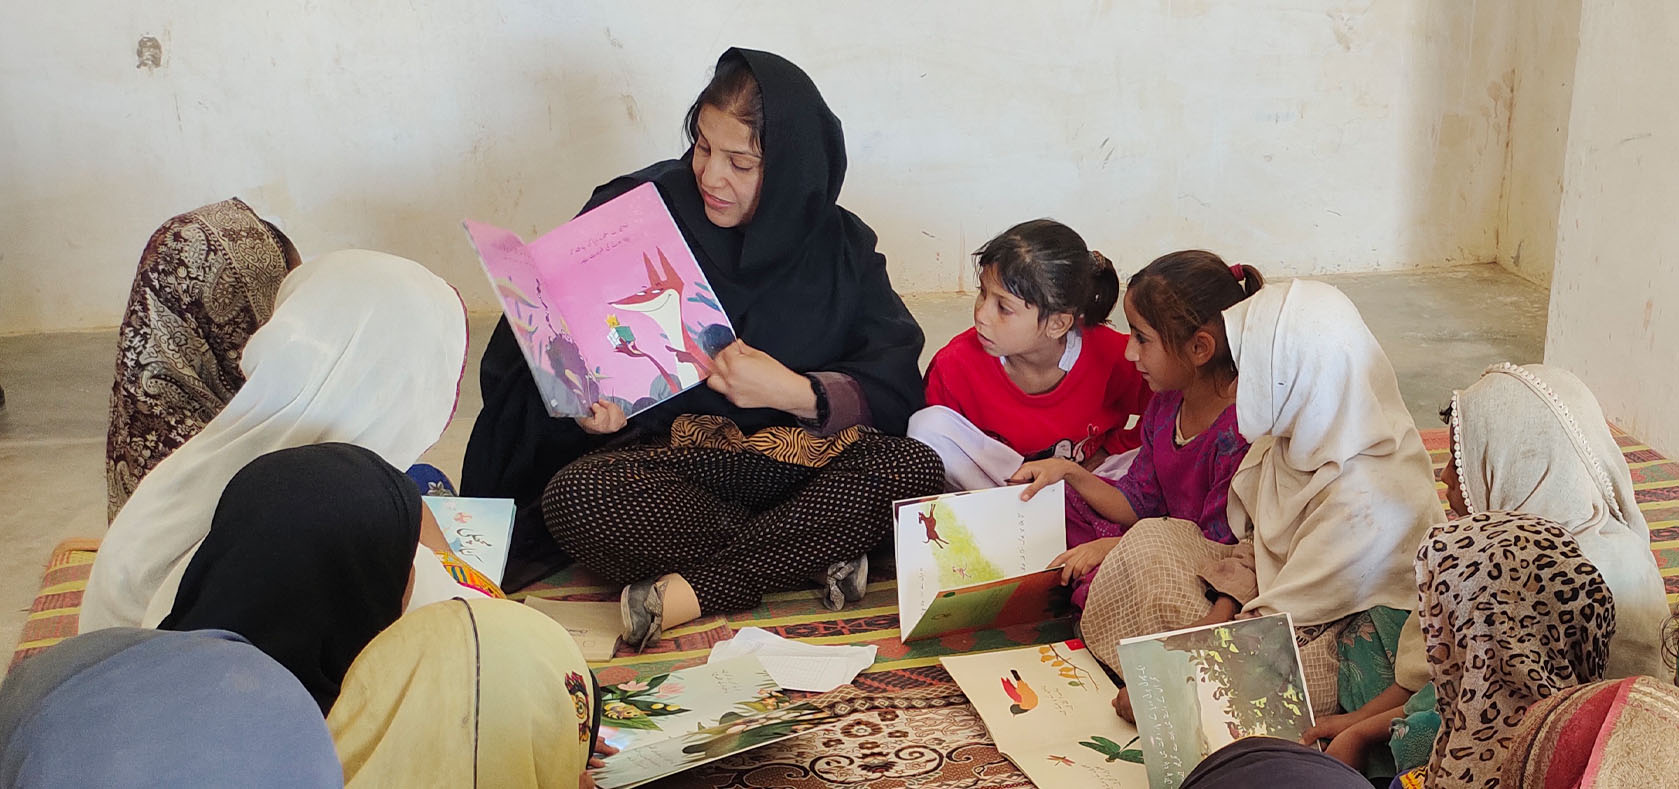 Sumera Mehboob reads a short story to girls supported by their organization. Photo: Courtesy of Sumera Mehboob